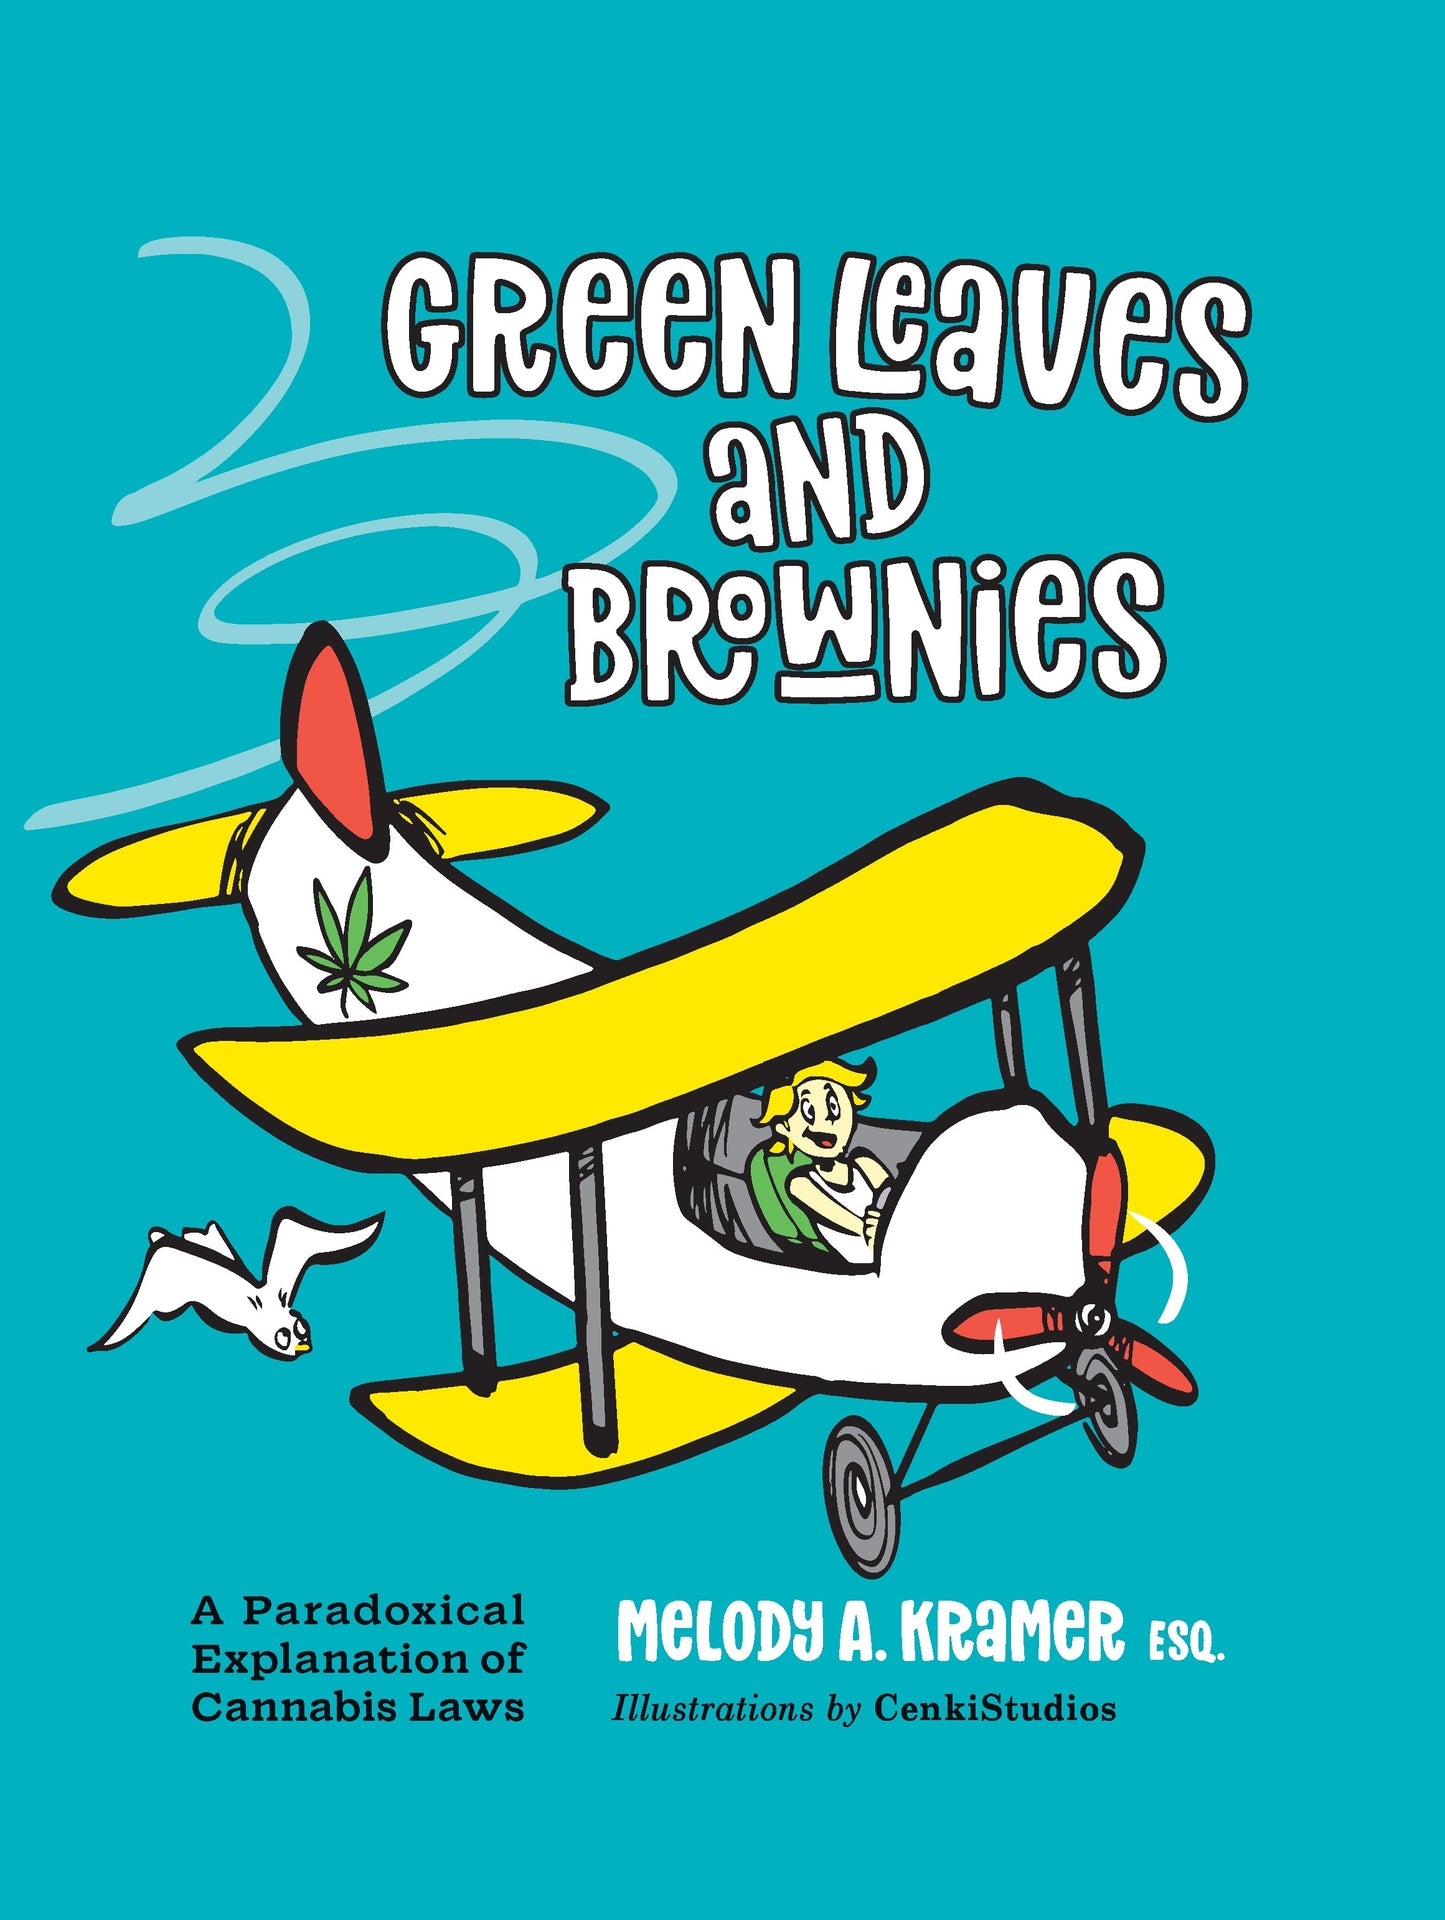 Green Leaves & Brownies, by the case